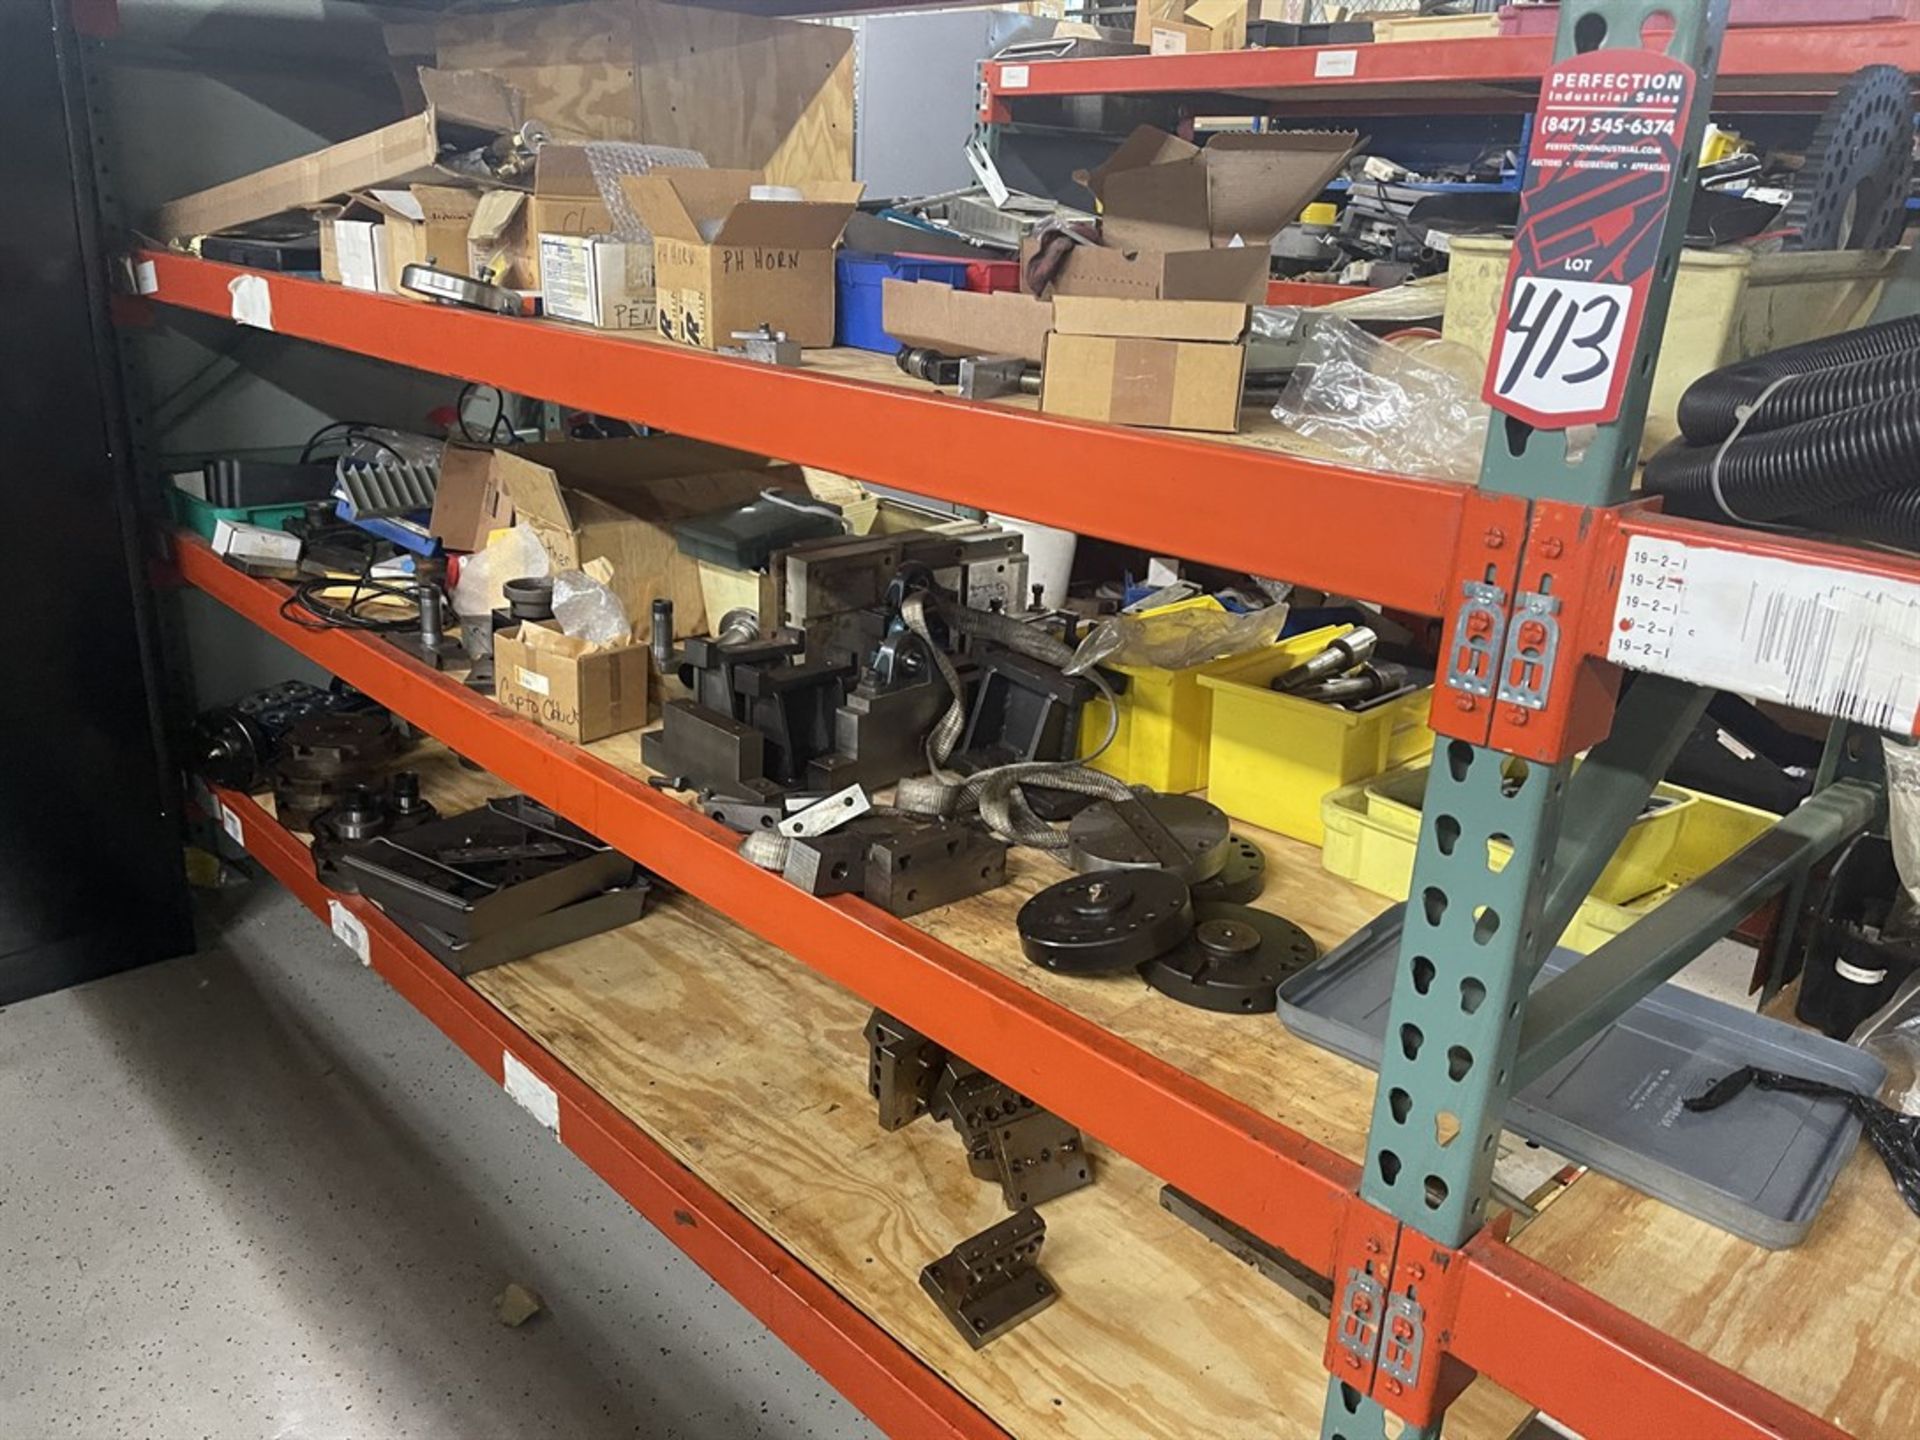 Lot of (2) Sections of Pallet Racking w/ Assorted Machine Parts Including Bearings, Chucks, - Image 9 of 9